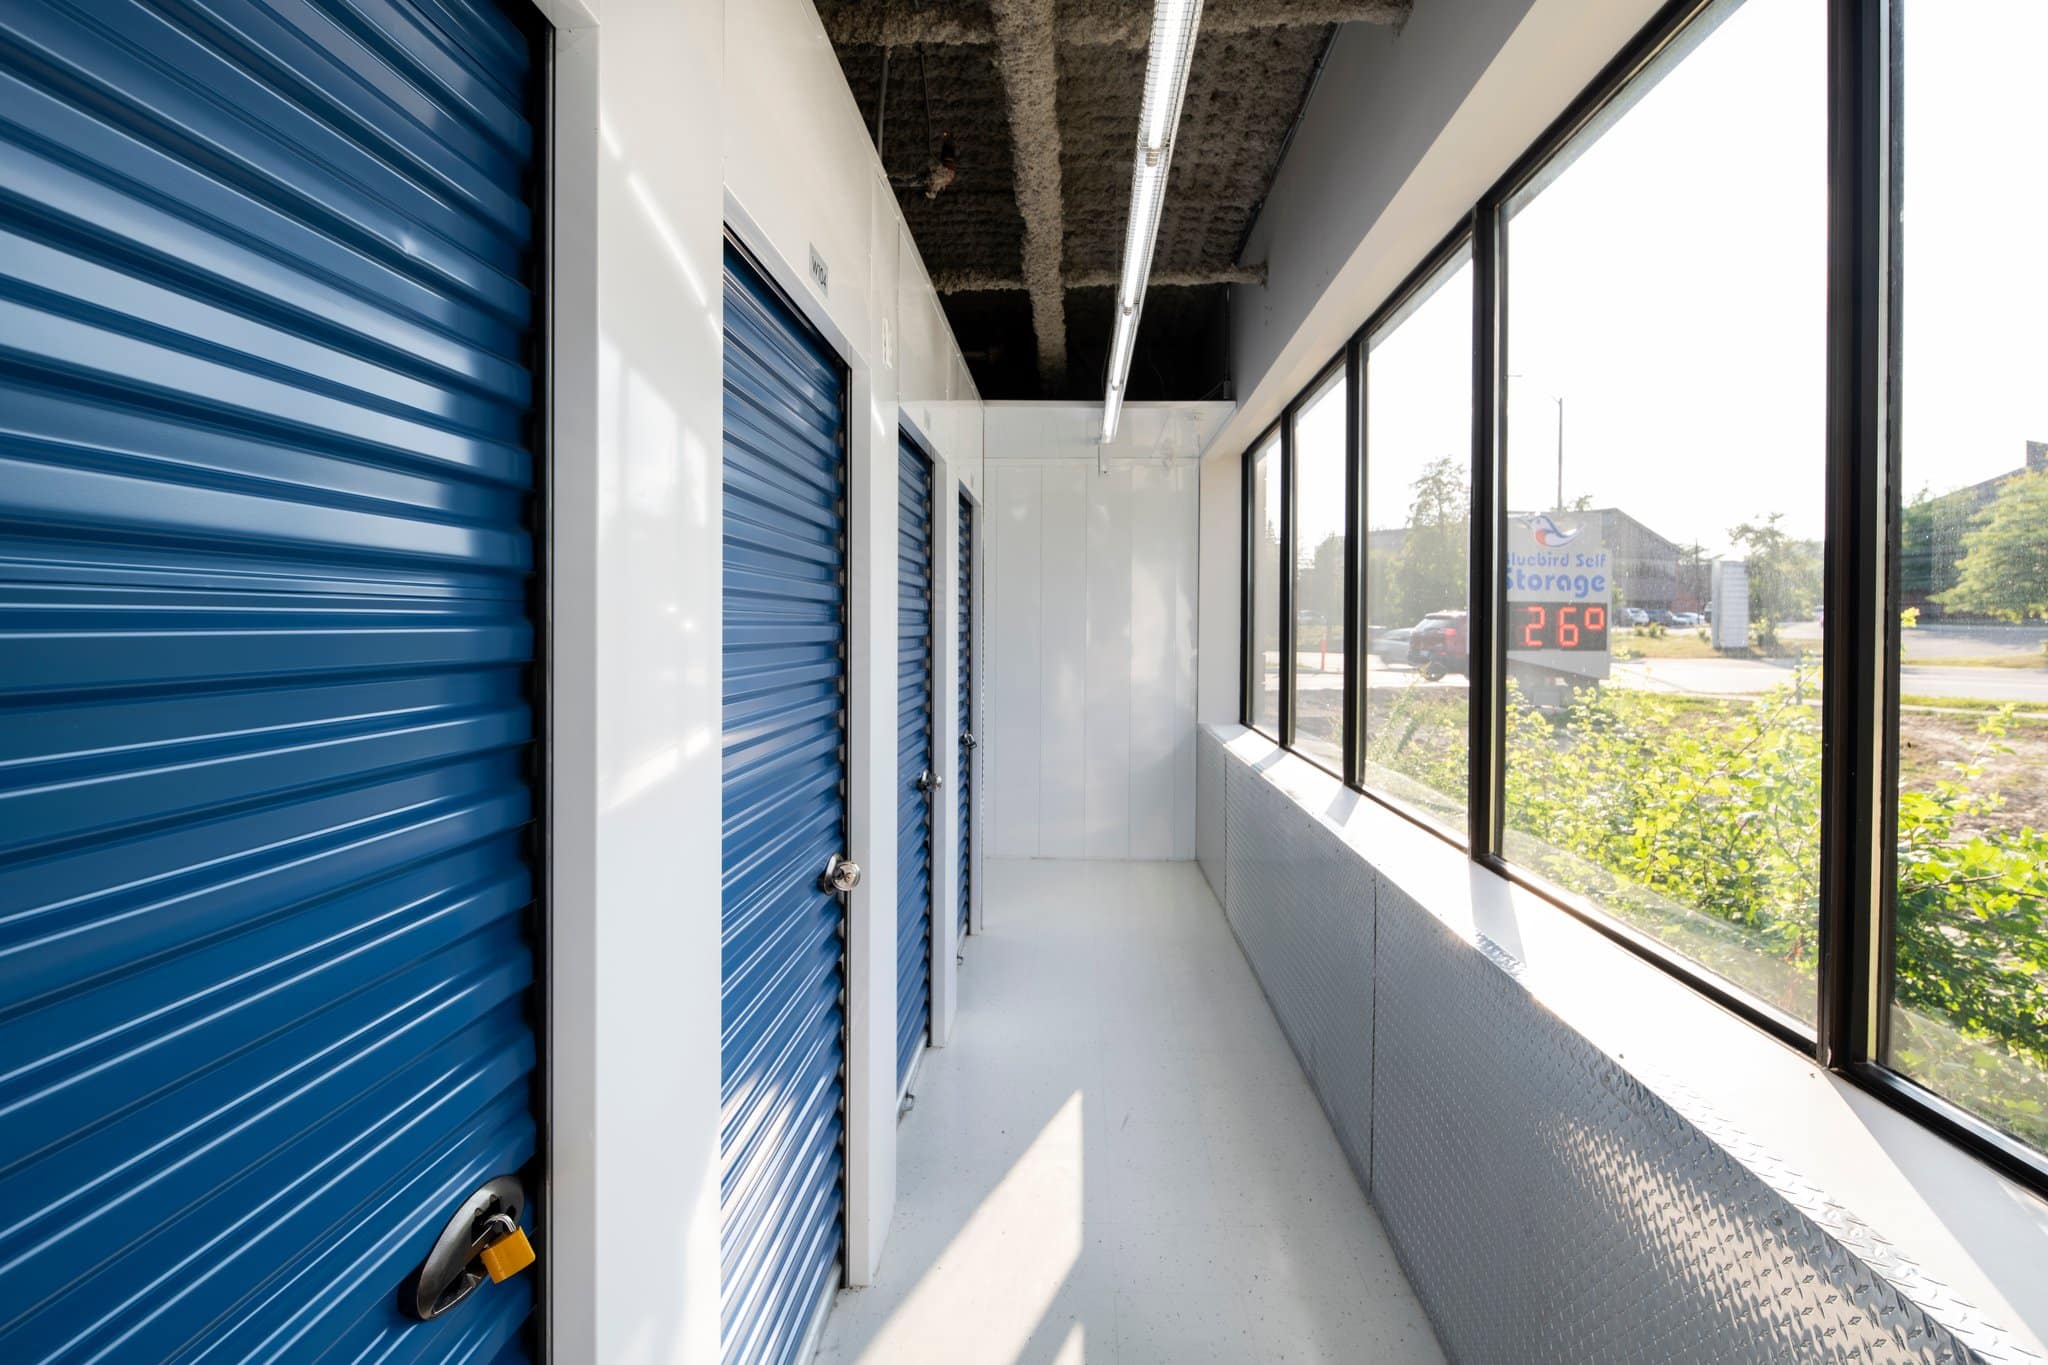 Unique storage units featuring natural light in the hallways.